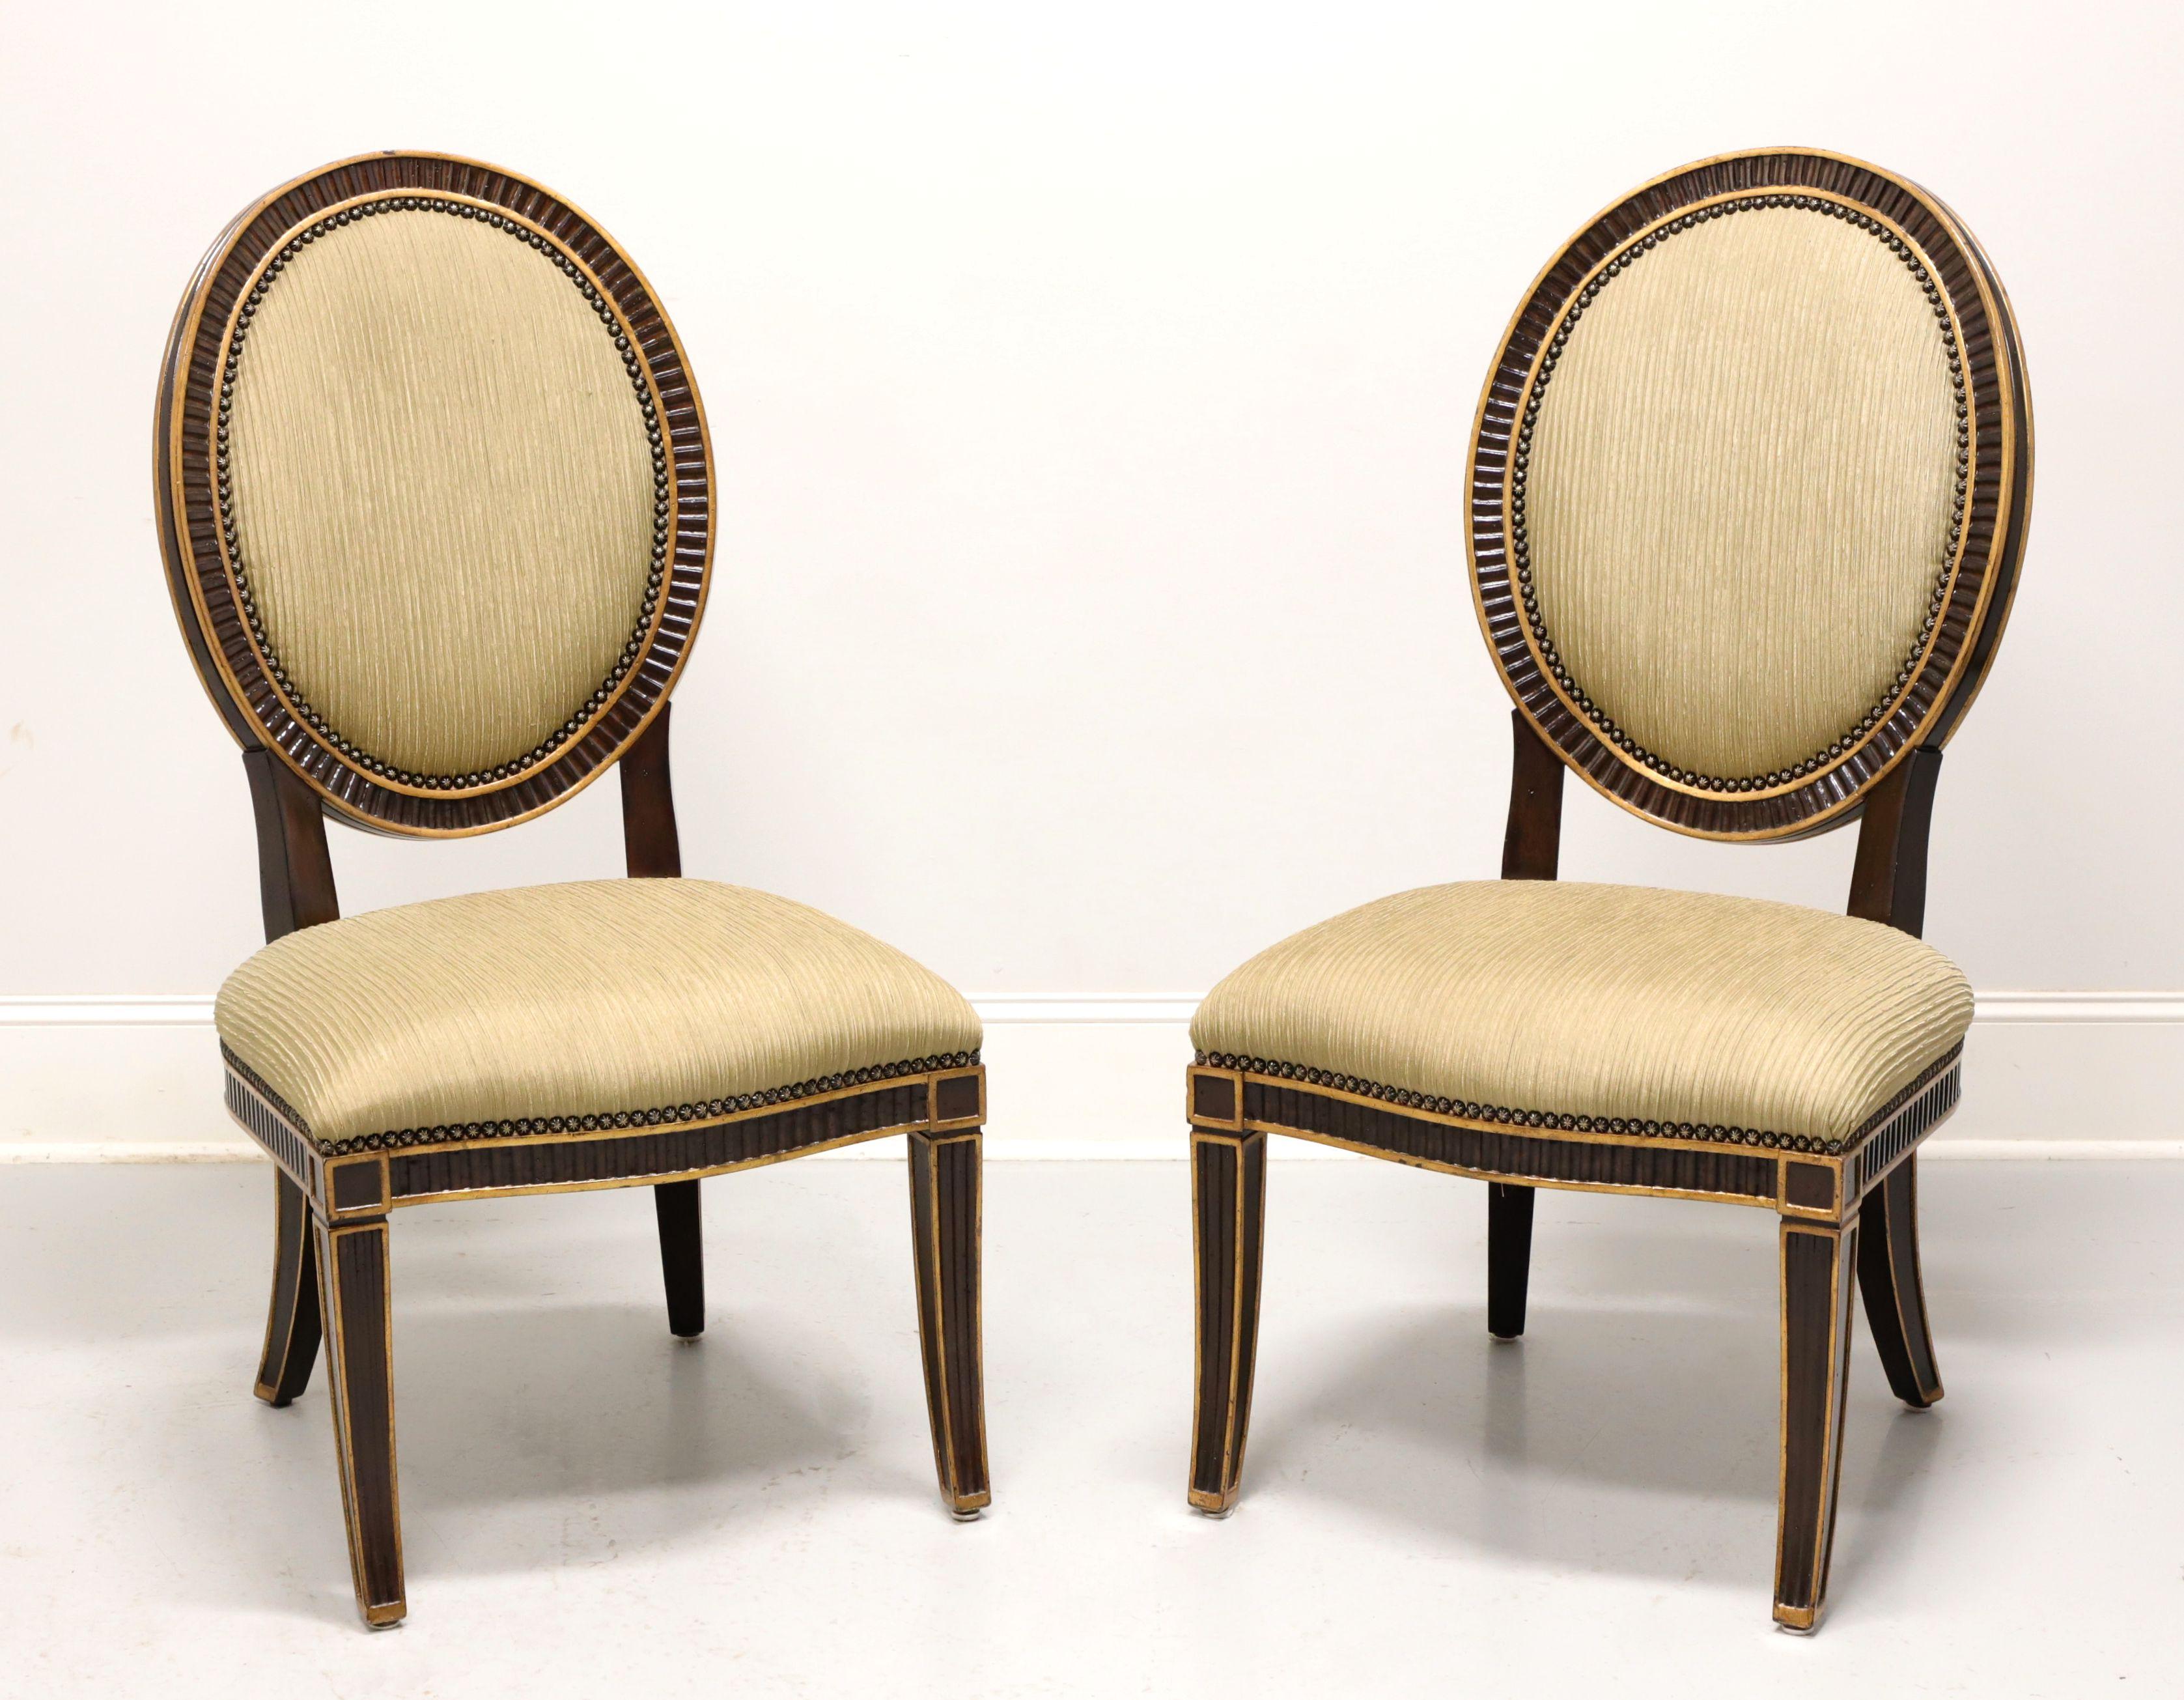 MARGE CARSON Rue Royale Contemporary French Dining Side Chairs - Pair A 1